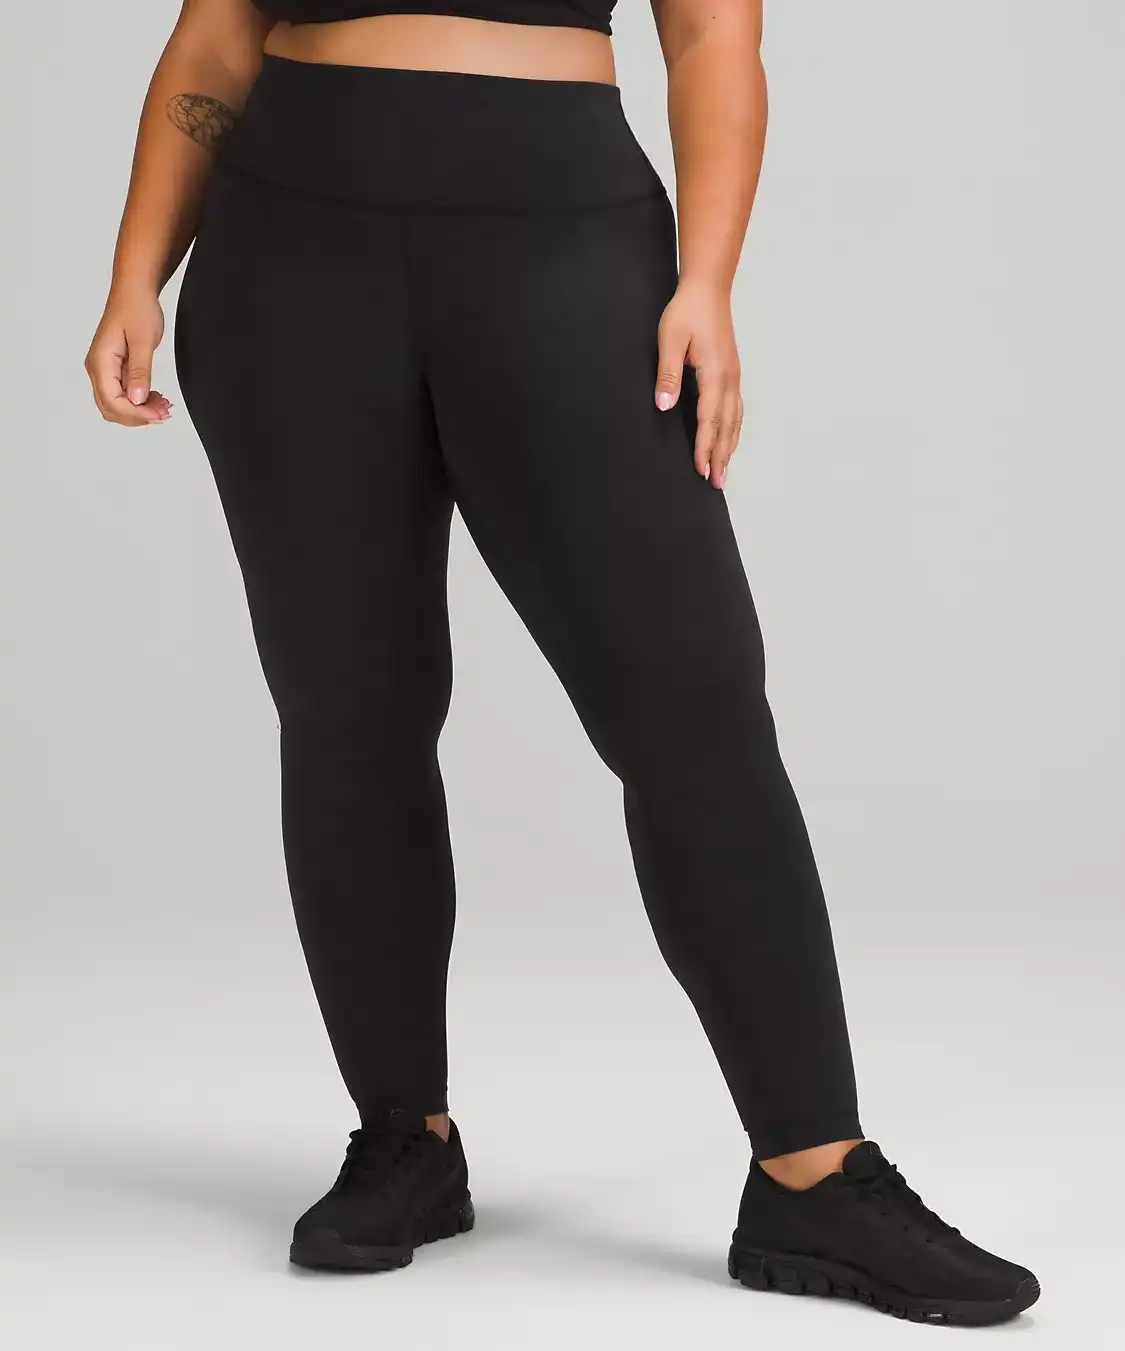 These Lululemon leggings have over 13,000 reviews — and they're under $100  right now